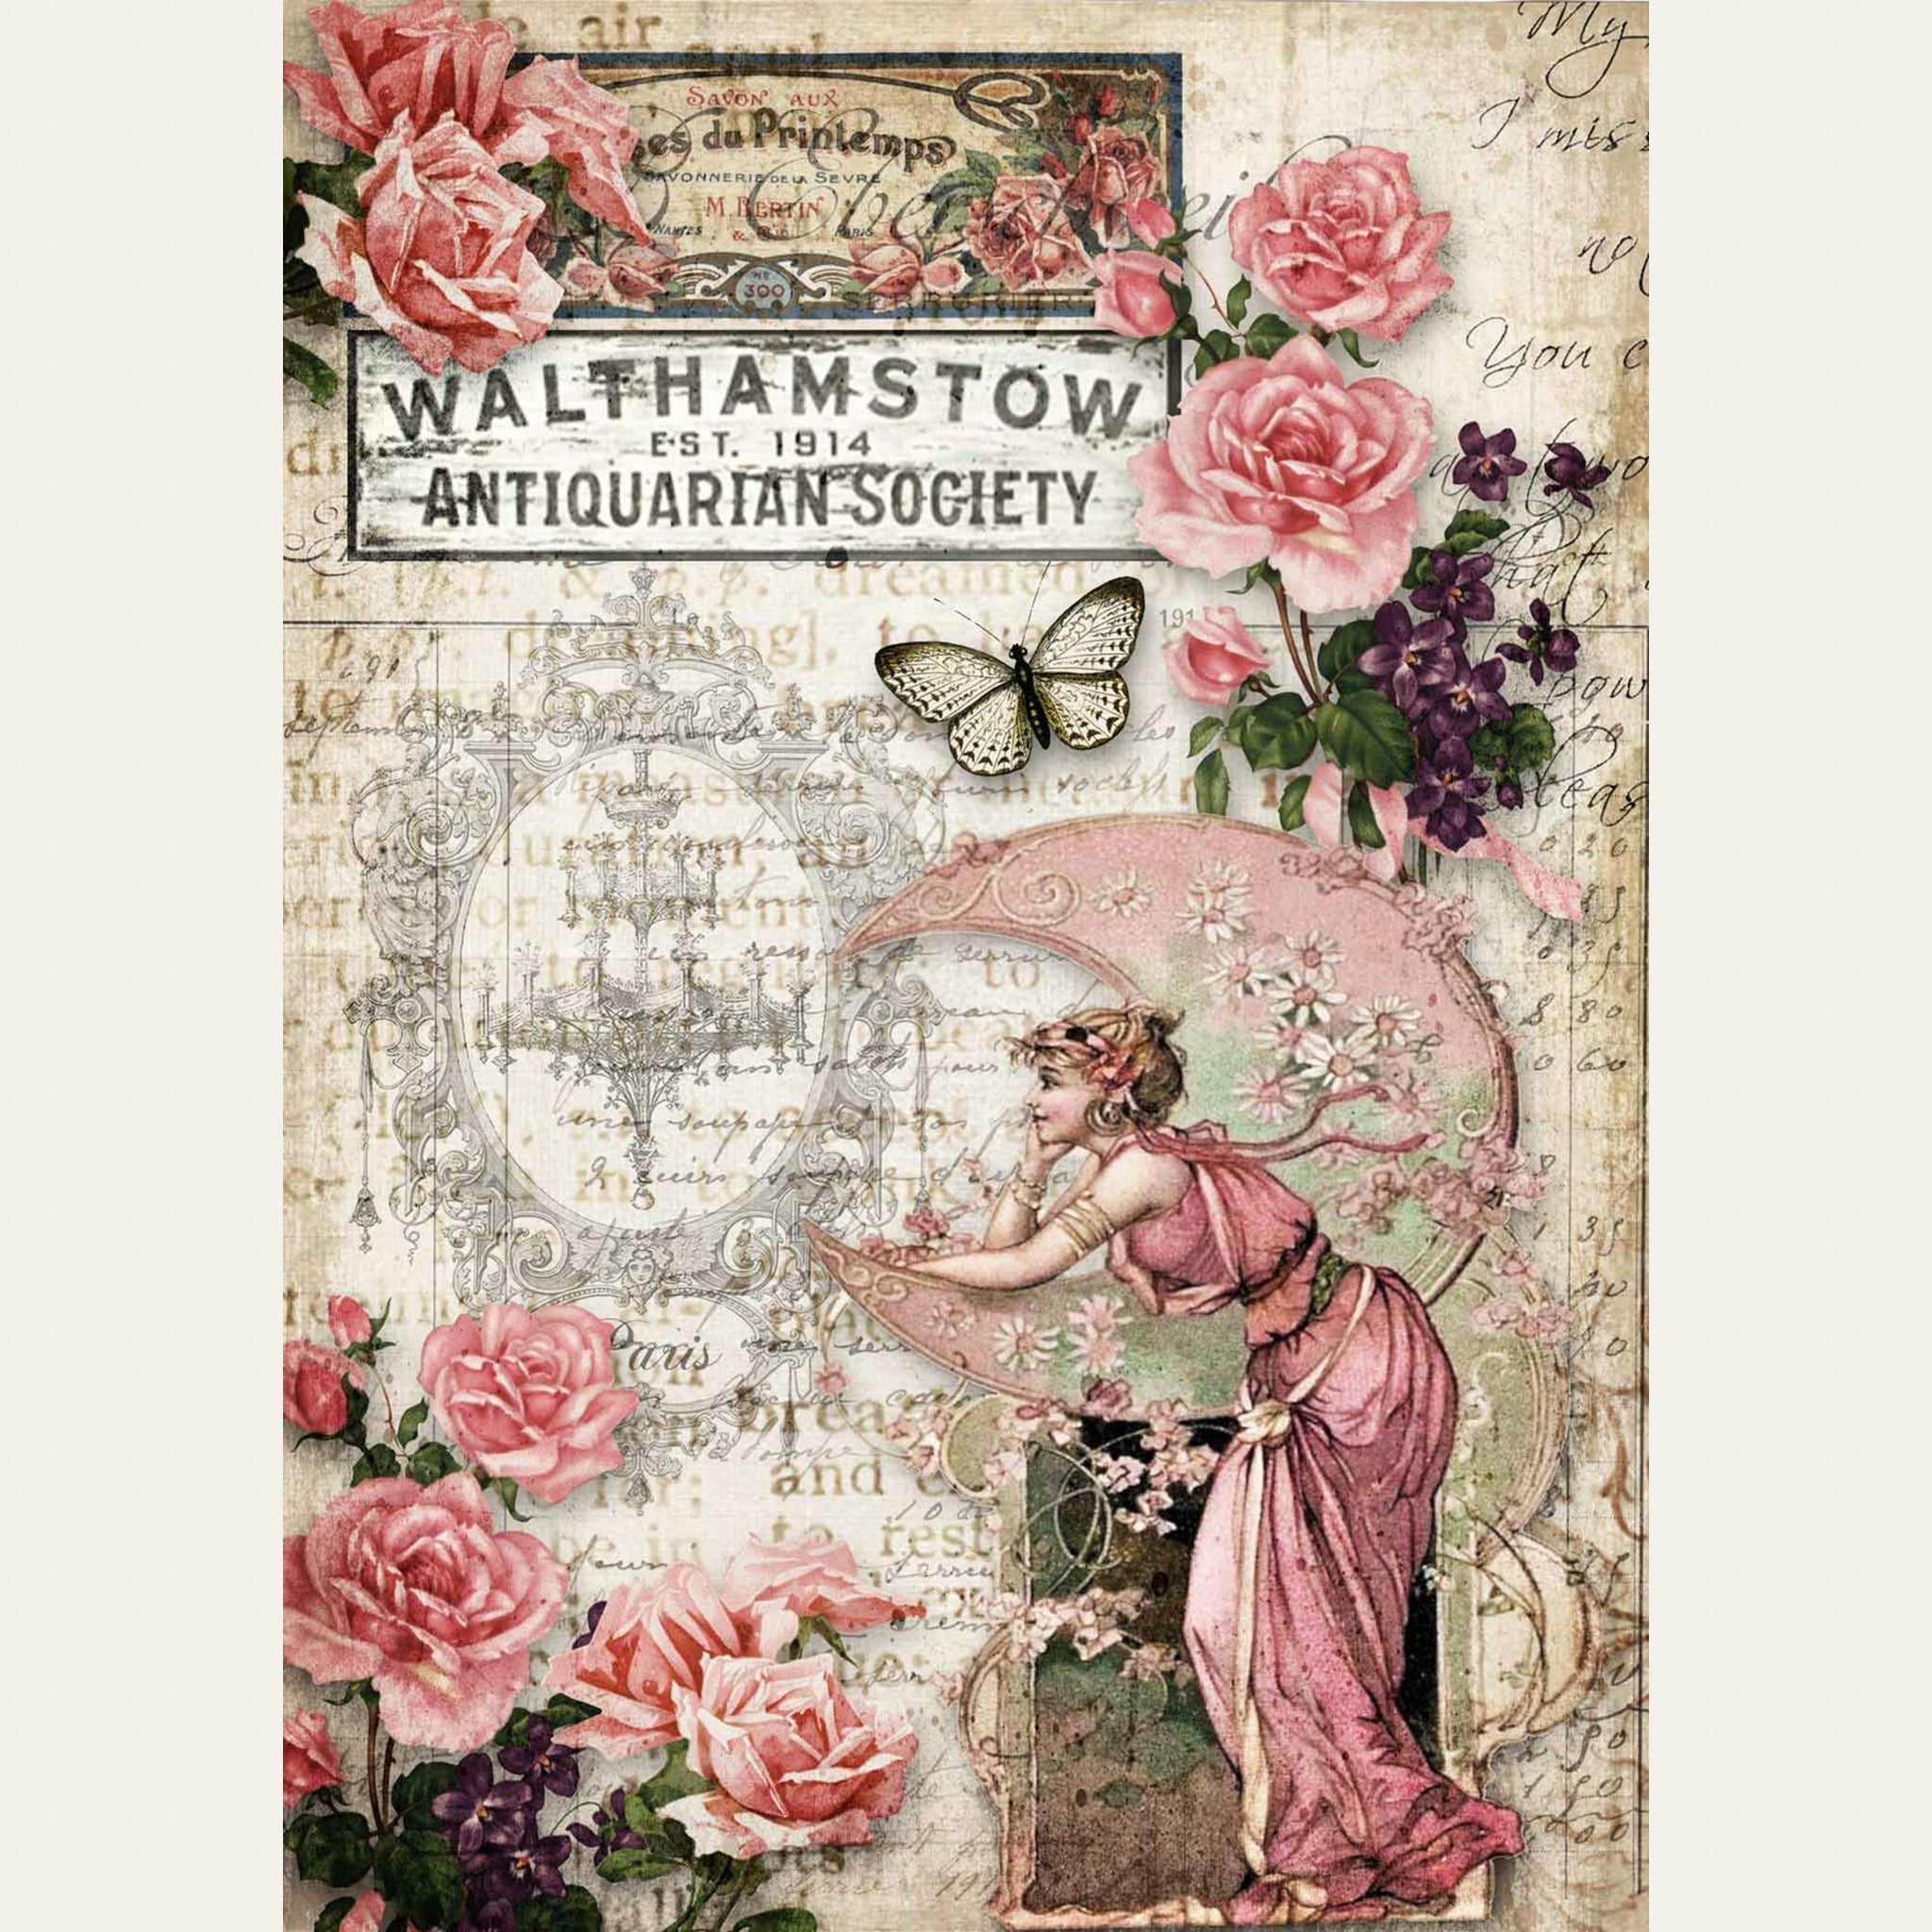 A0 rice paper design that features vintage parchment with writing, large pink roses, a butterfly, vintage signs, and a woman in a pink dress resting on a pale pink crescent moon. White borders on the sides.